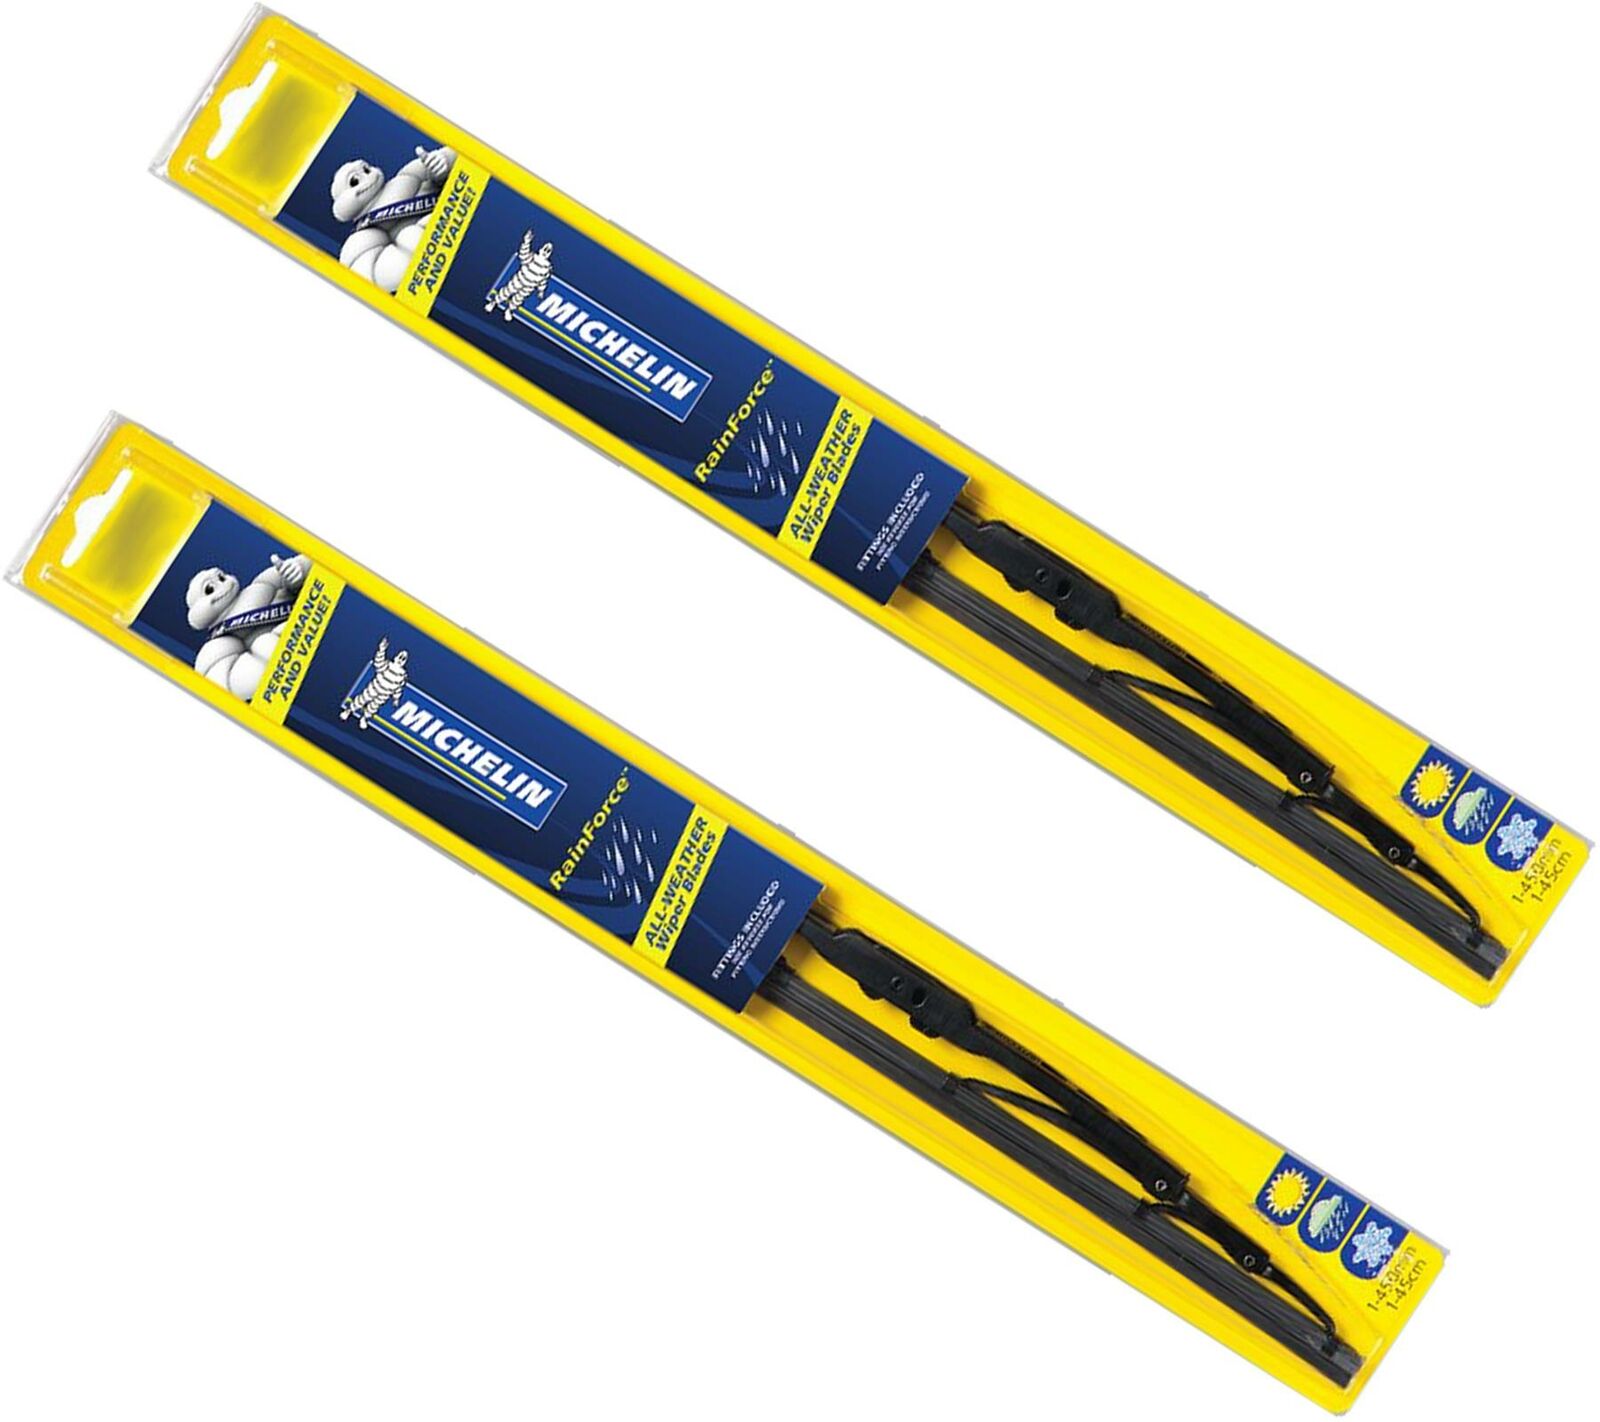 Michelin Rainforce Traditional Wiper Blades Pair 17"/24" for Rover CITYRover